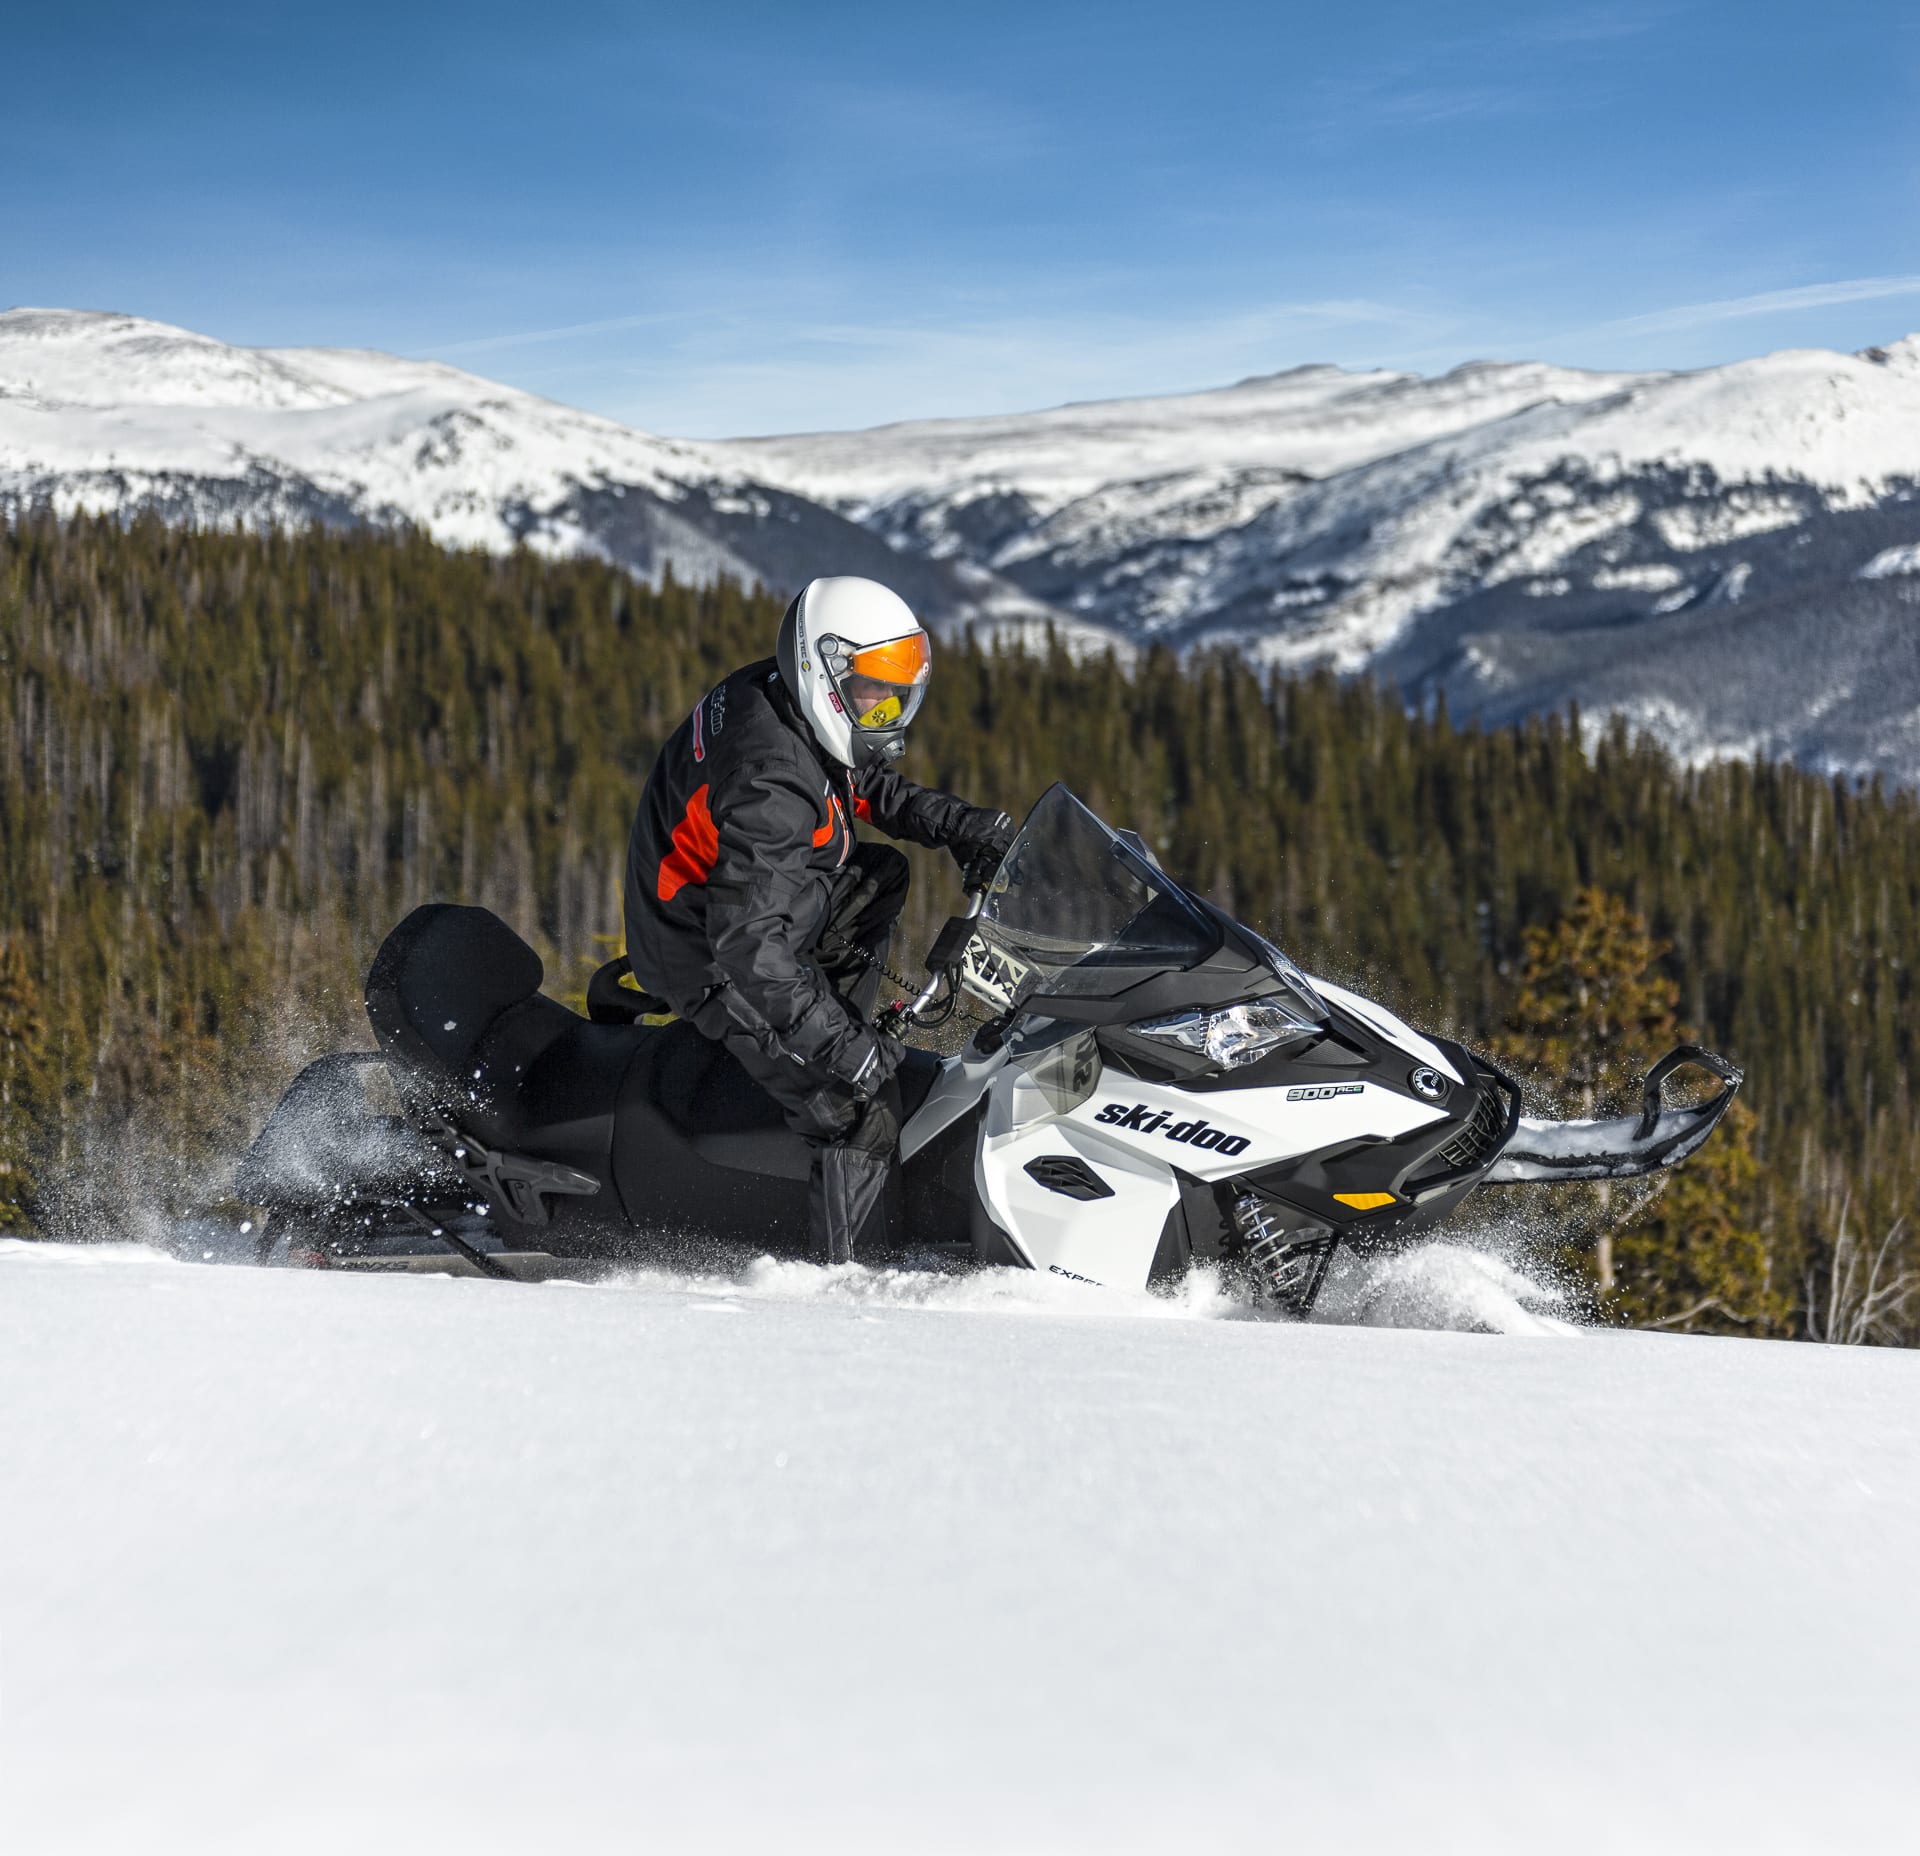 Ski doo sporting. BRP Expedition 900 Sport. Снегоход Expedition 900 BRP Ski-Doo. BRP Expedition Sport 900 Ace. Ski Doo Expedition Sport 600 Ace.